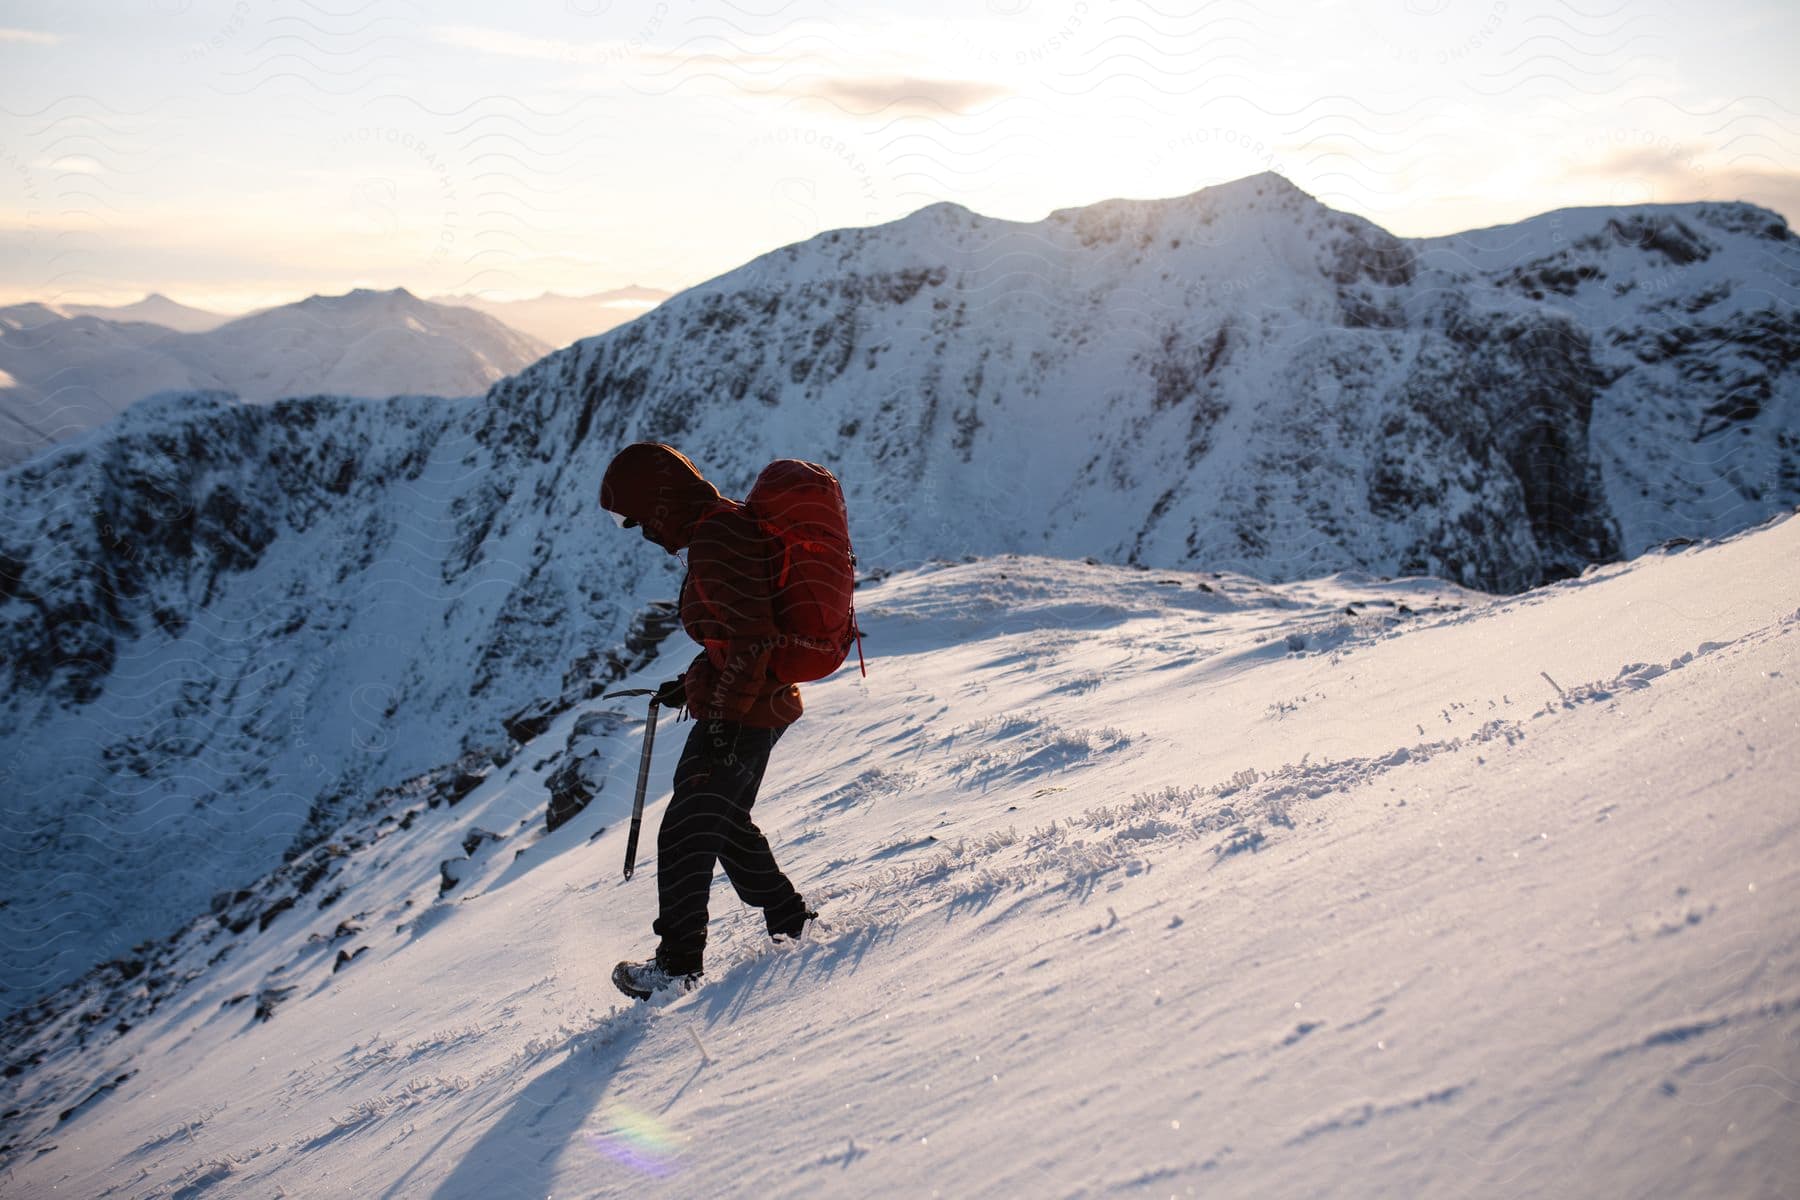 A hiker walks down a snowy slope on top of a mountain